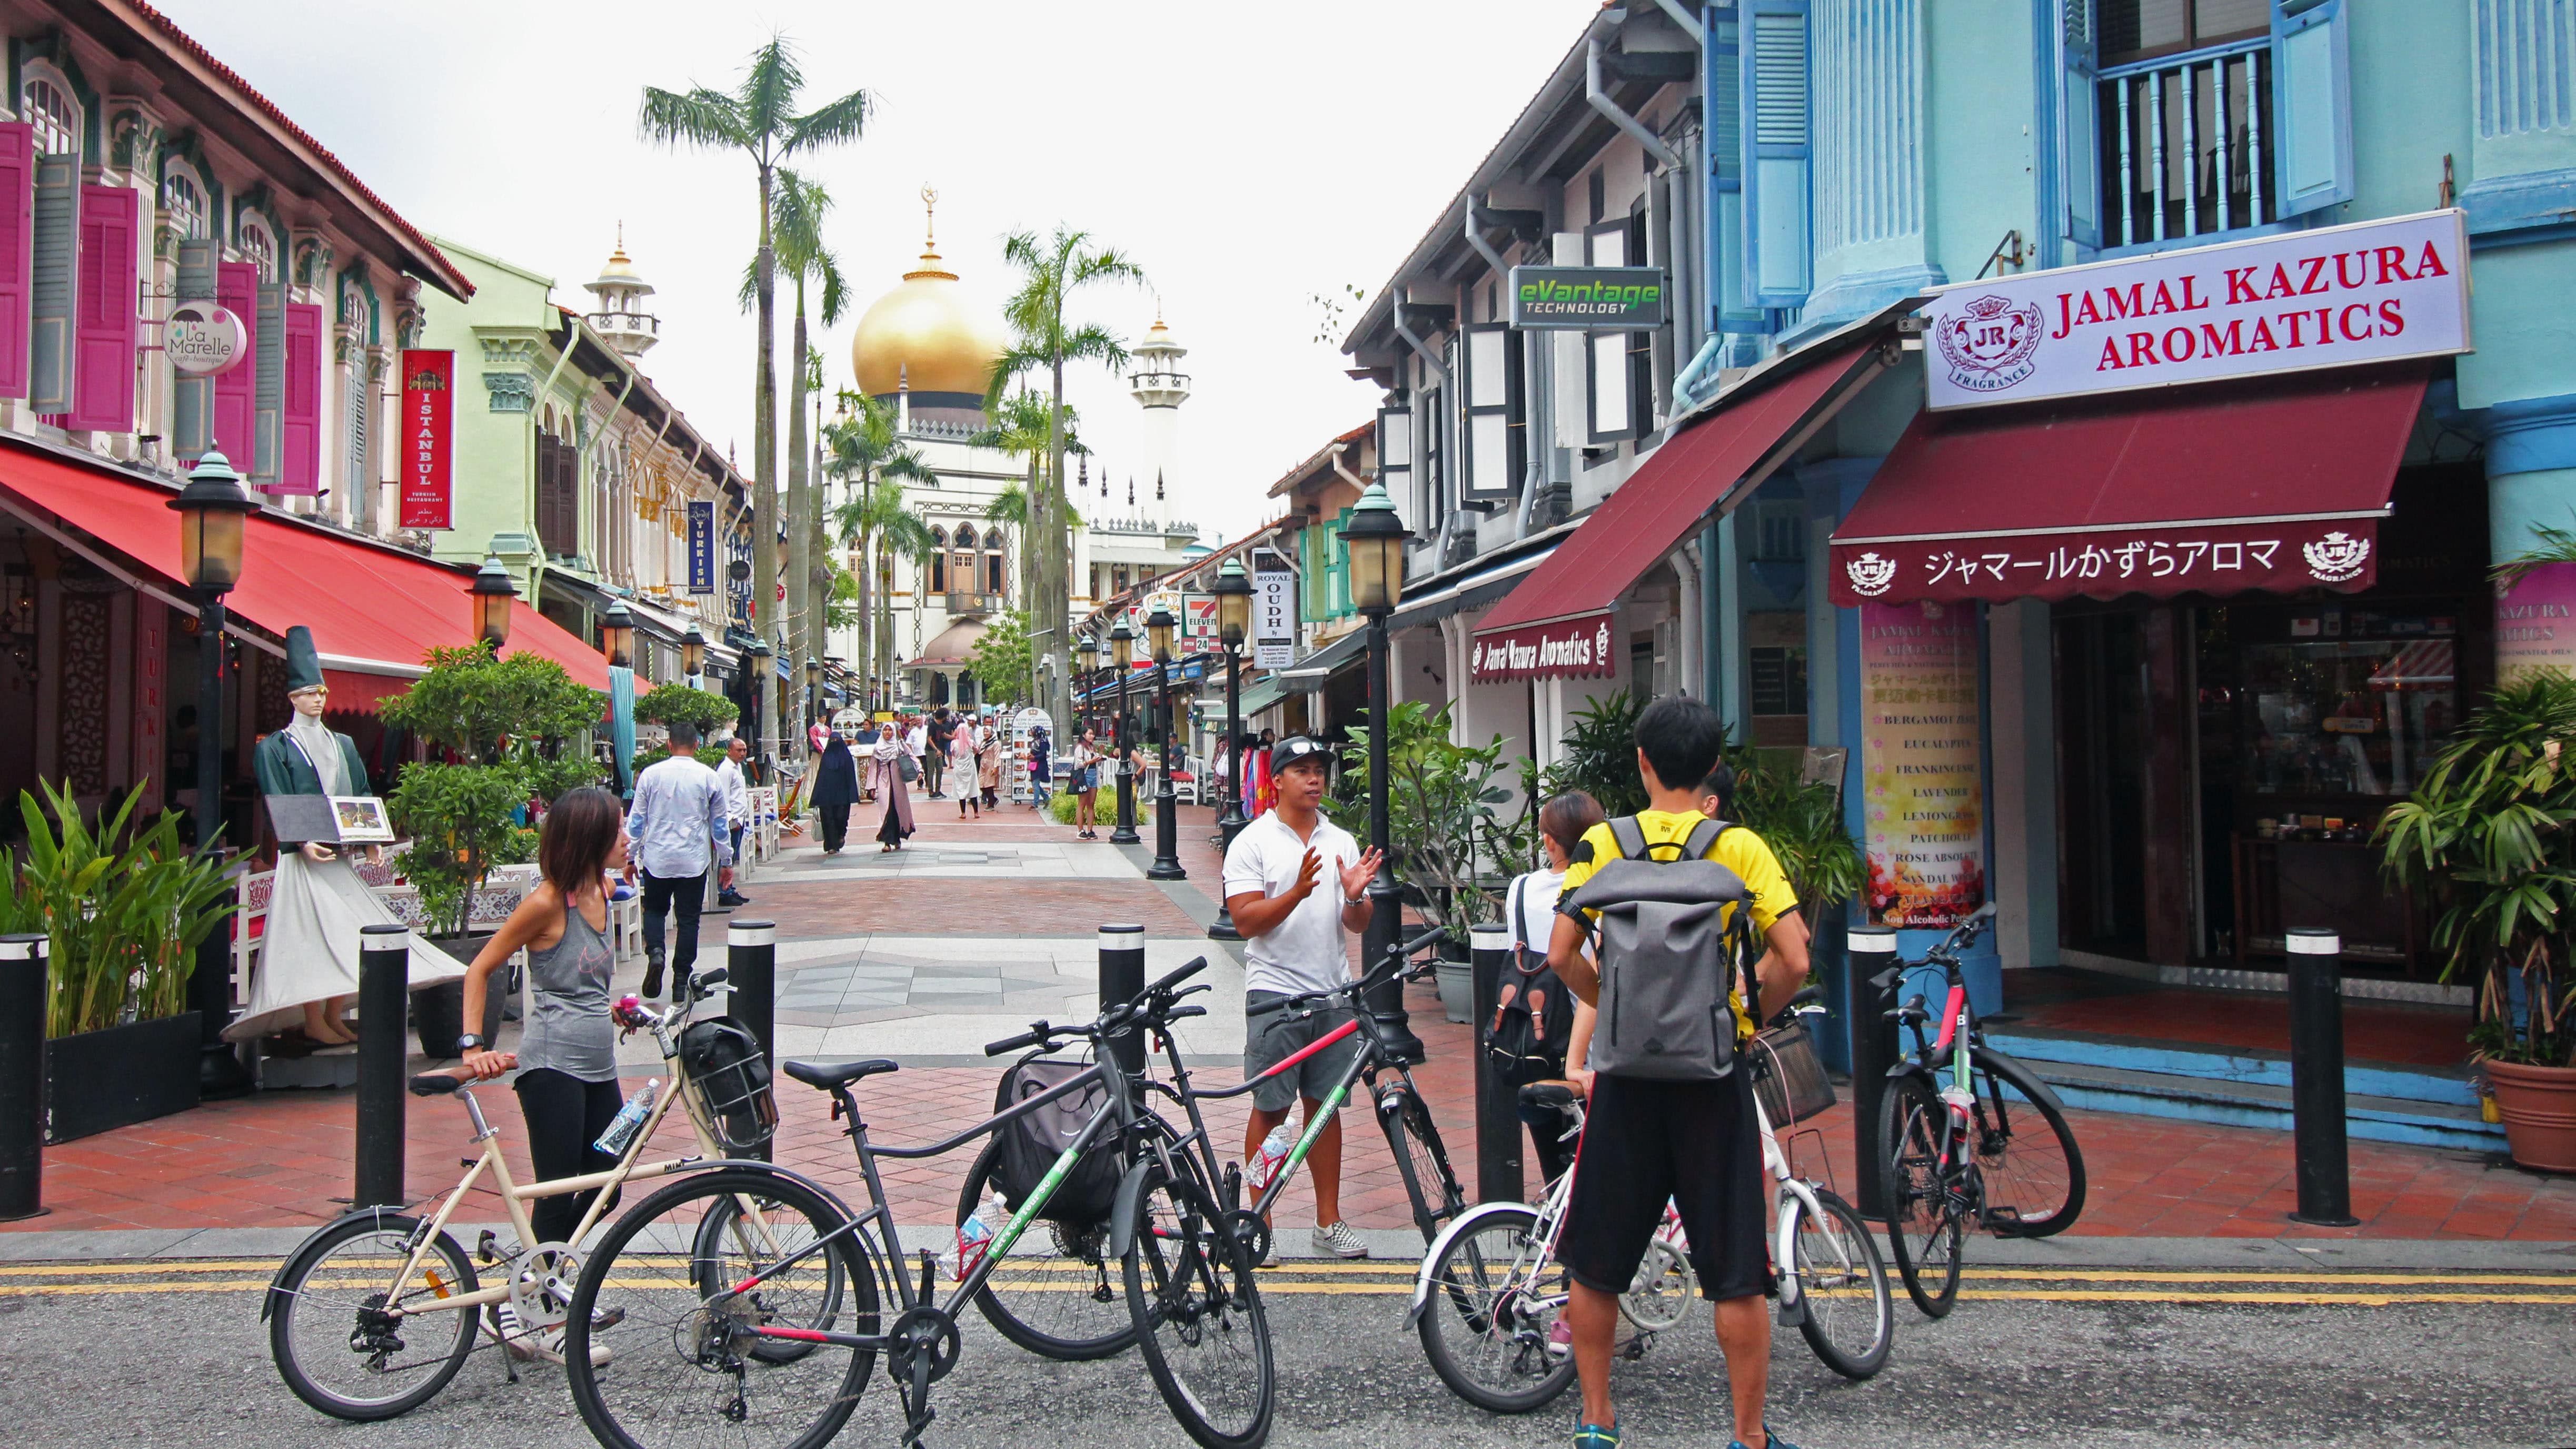 Let’s Go Bike Singapore’s Historical Singapore Bike Tour takes you along the Singapore River, across Marina Bay, the Civic District and the main cultural districts like Chinatown and Kampong Glam. Photo by Lin Yanqin	